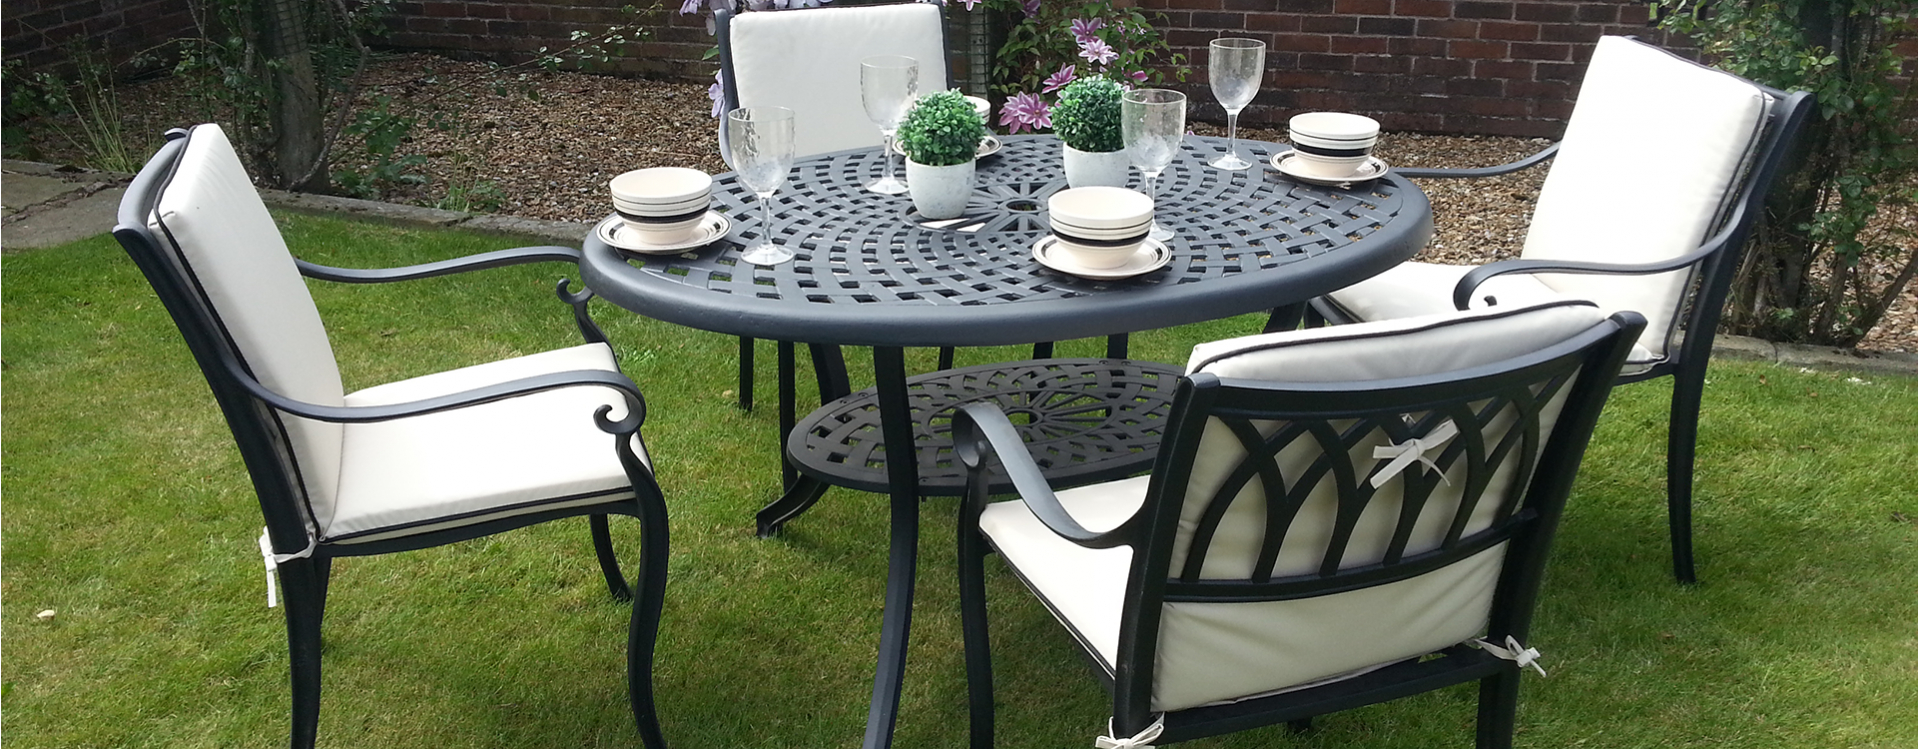 Cast Aluminium Garden Furniture Free Fast Delivery within size 1920 X 749